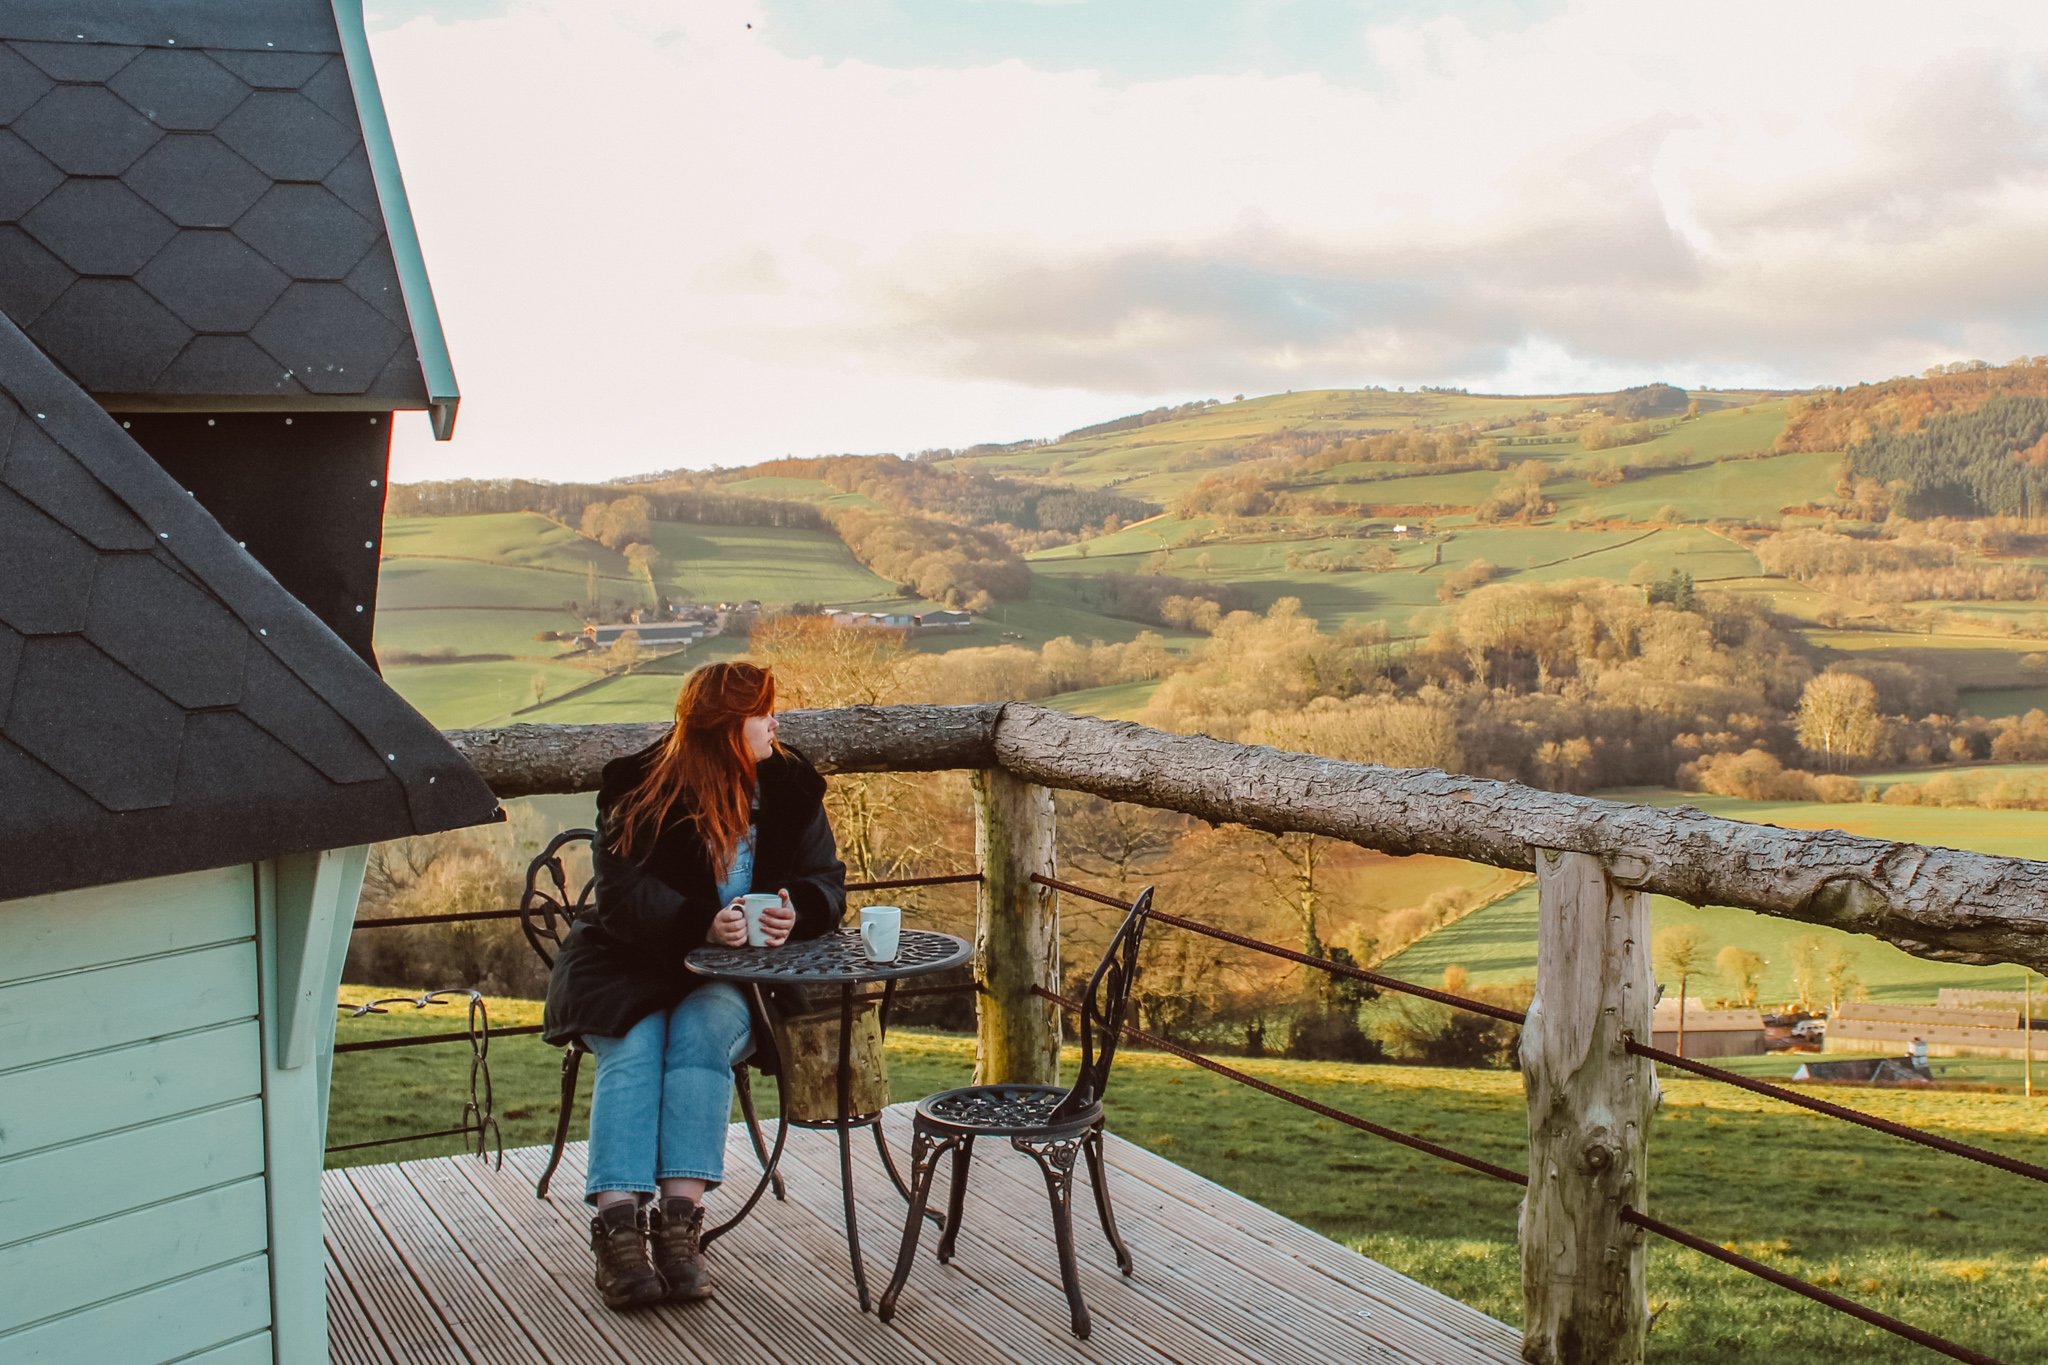 Glamping at The Dragon's Rest, Herefordshire